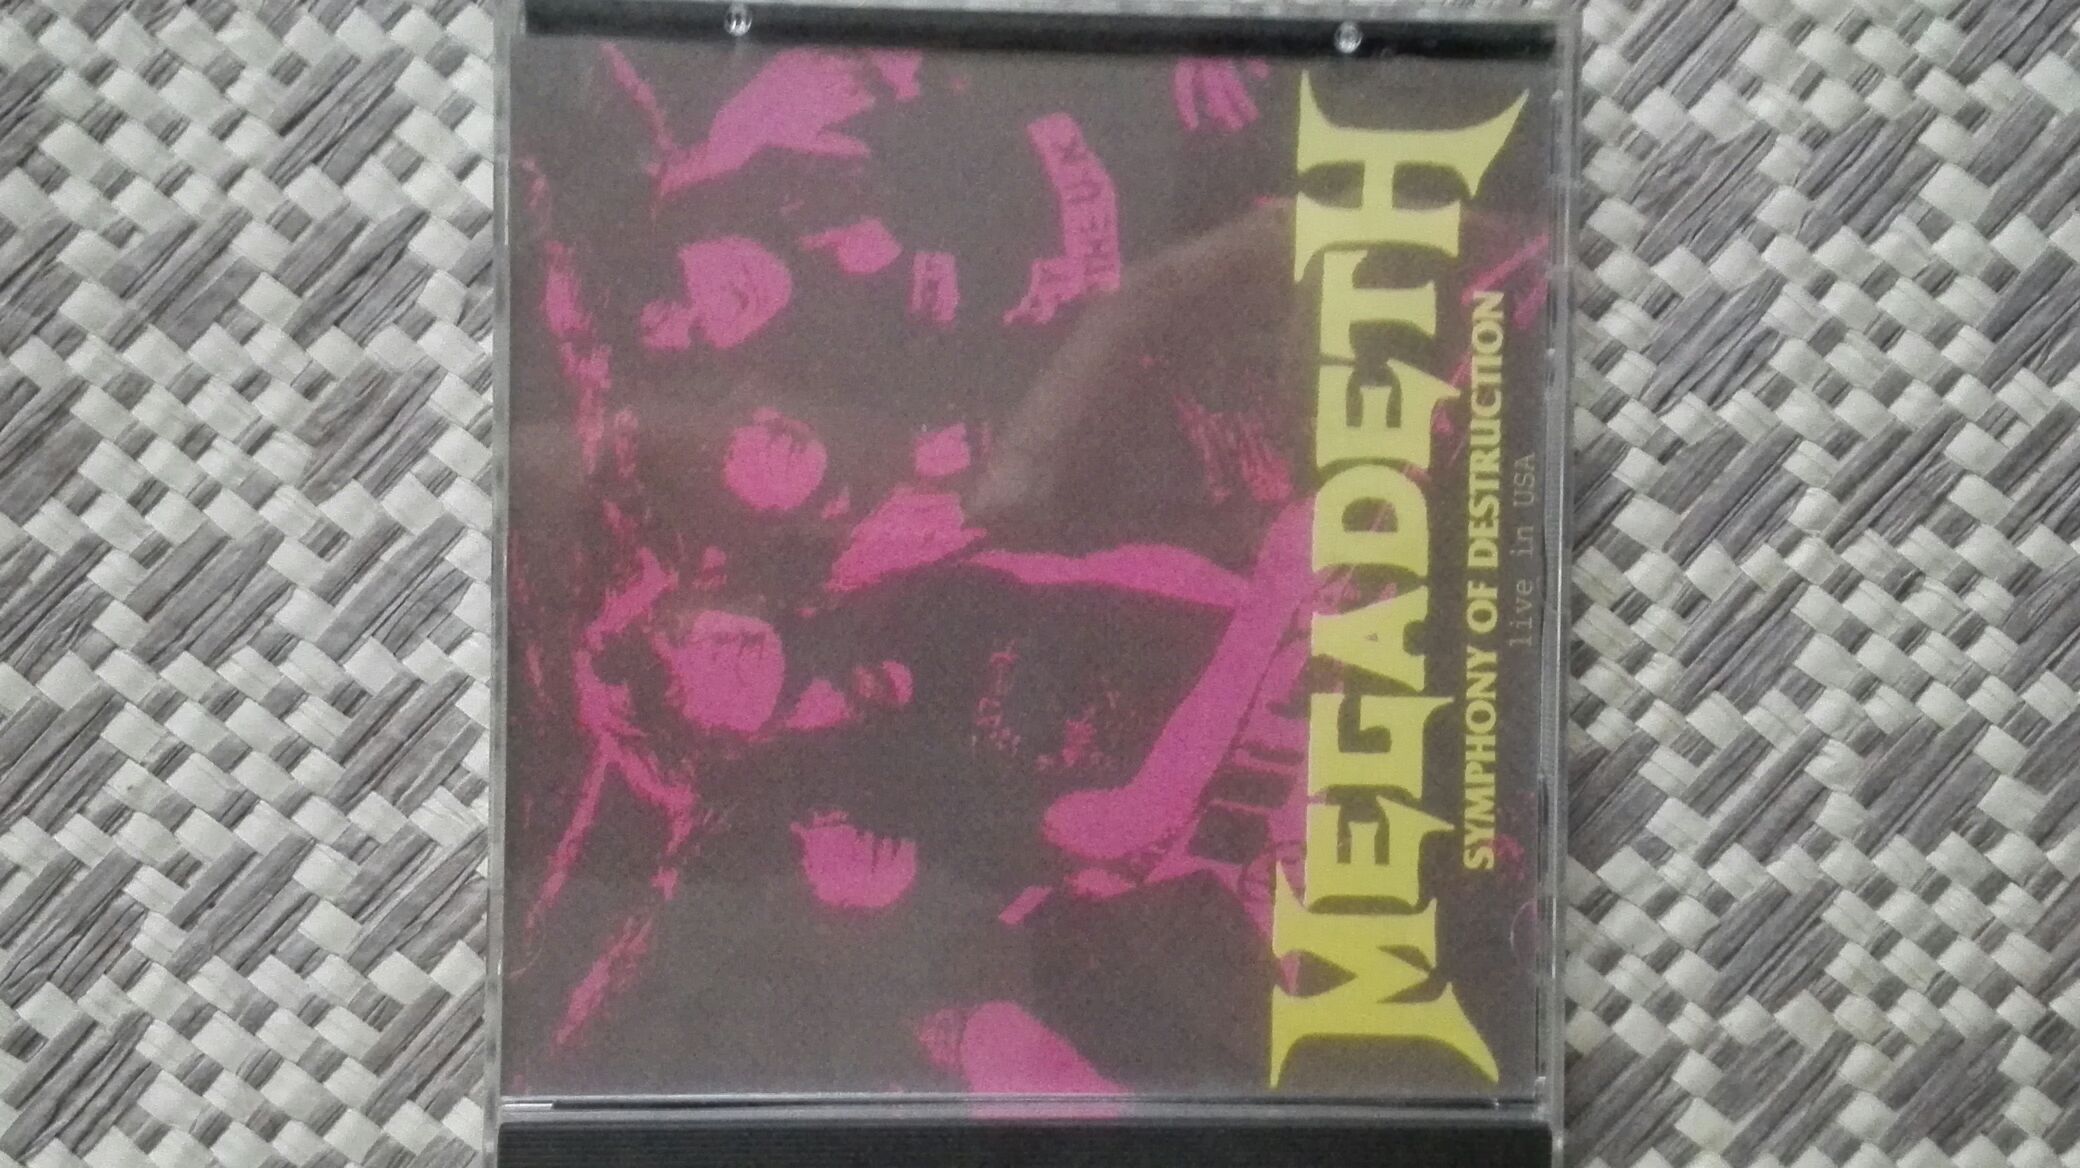 Symphony Of Destruction - Megadeth (CD) music collectible [Barcode 5450162155196] - Main Image 1